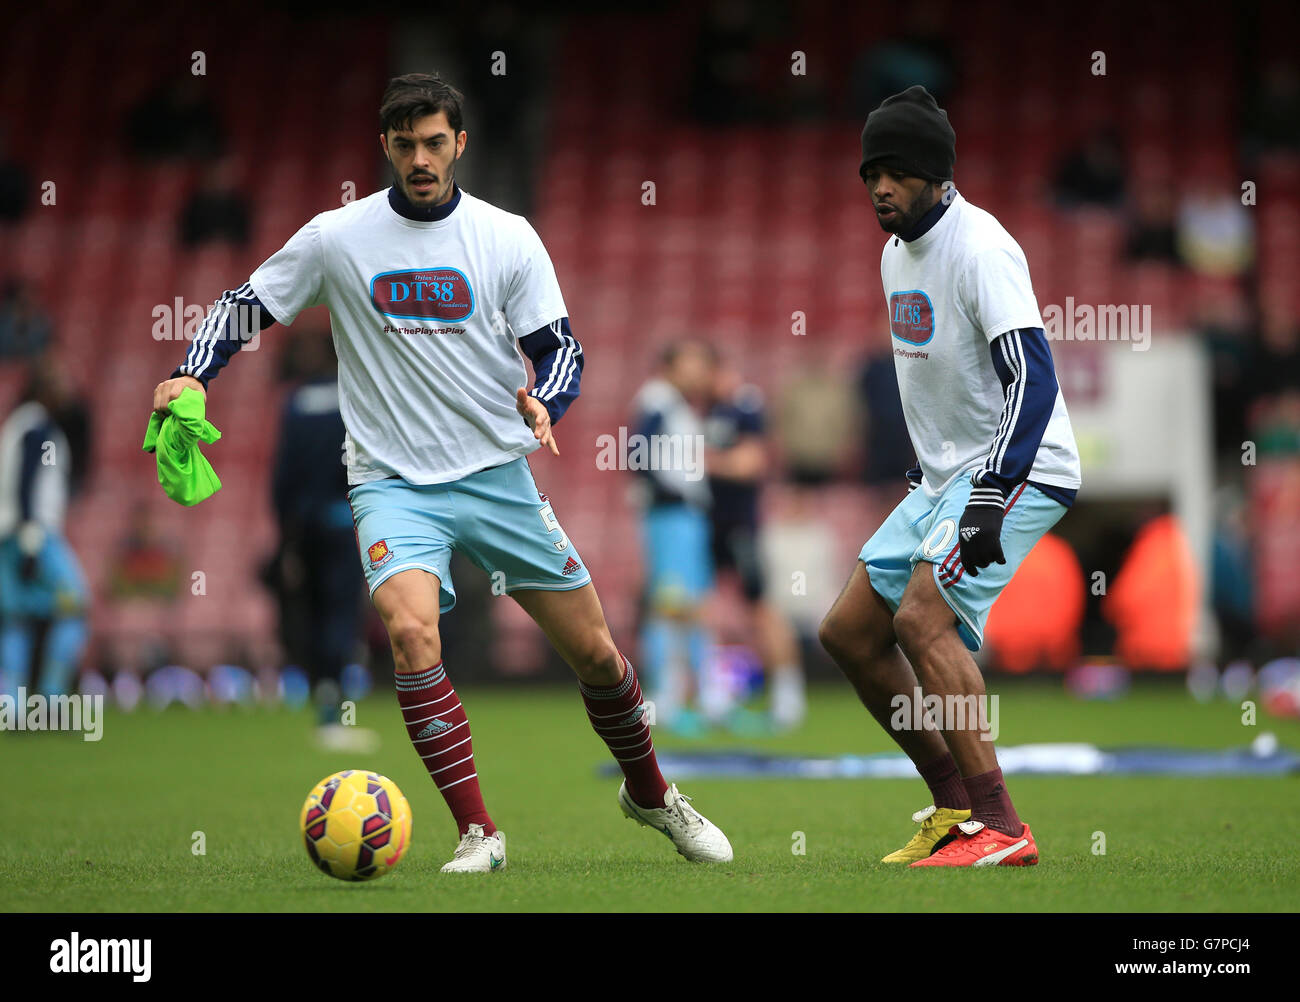 West Ham United's James Tomkins (left) and Alex Song wearing DT38 Foundation T Shirts in memory of former West Ham player Dylan Tombides during the warm up before the Barclays Premier League match at Upton Park, London. PRESS ASSOCIATION Photo. Picture date: Saturday February 28, 2015. See PA story SOCCER West Ham. Photo credit should read: Nick Potts/PA Wire. RESTRICTIONS: Editorial use only. Maximum 45 images during a match. No video emulation or promotion as 'live'. No use in games, competitions, merchandise, betting or single club/player services. No use with unofficial audio, video, Stock Photo